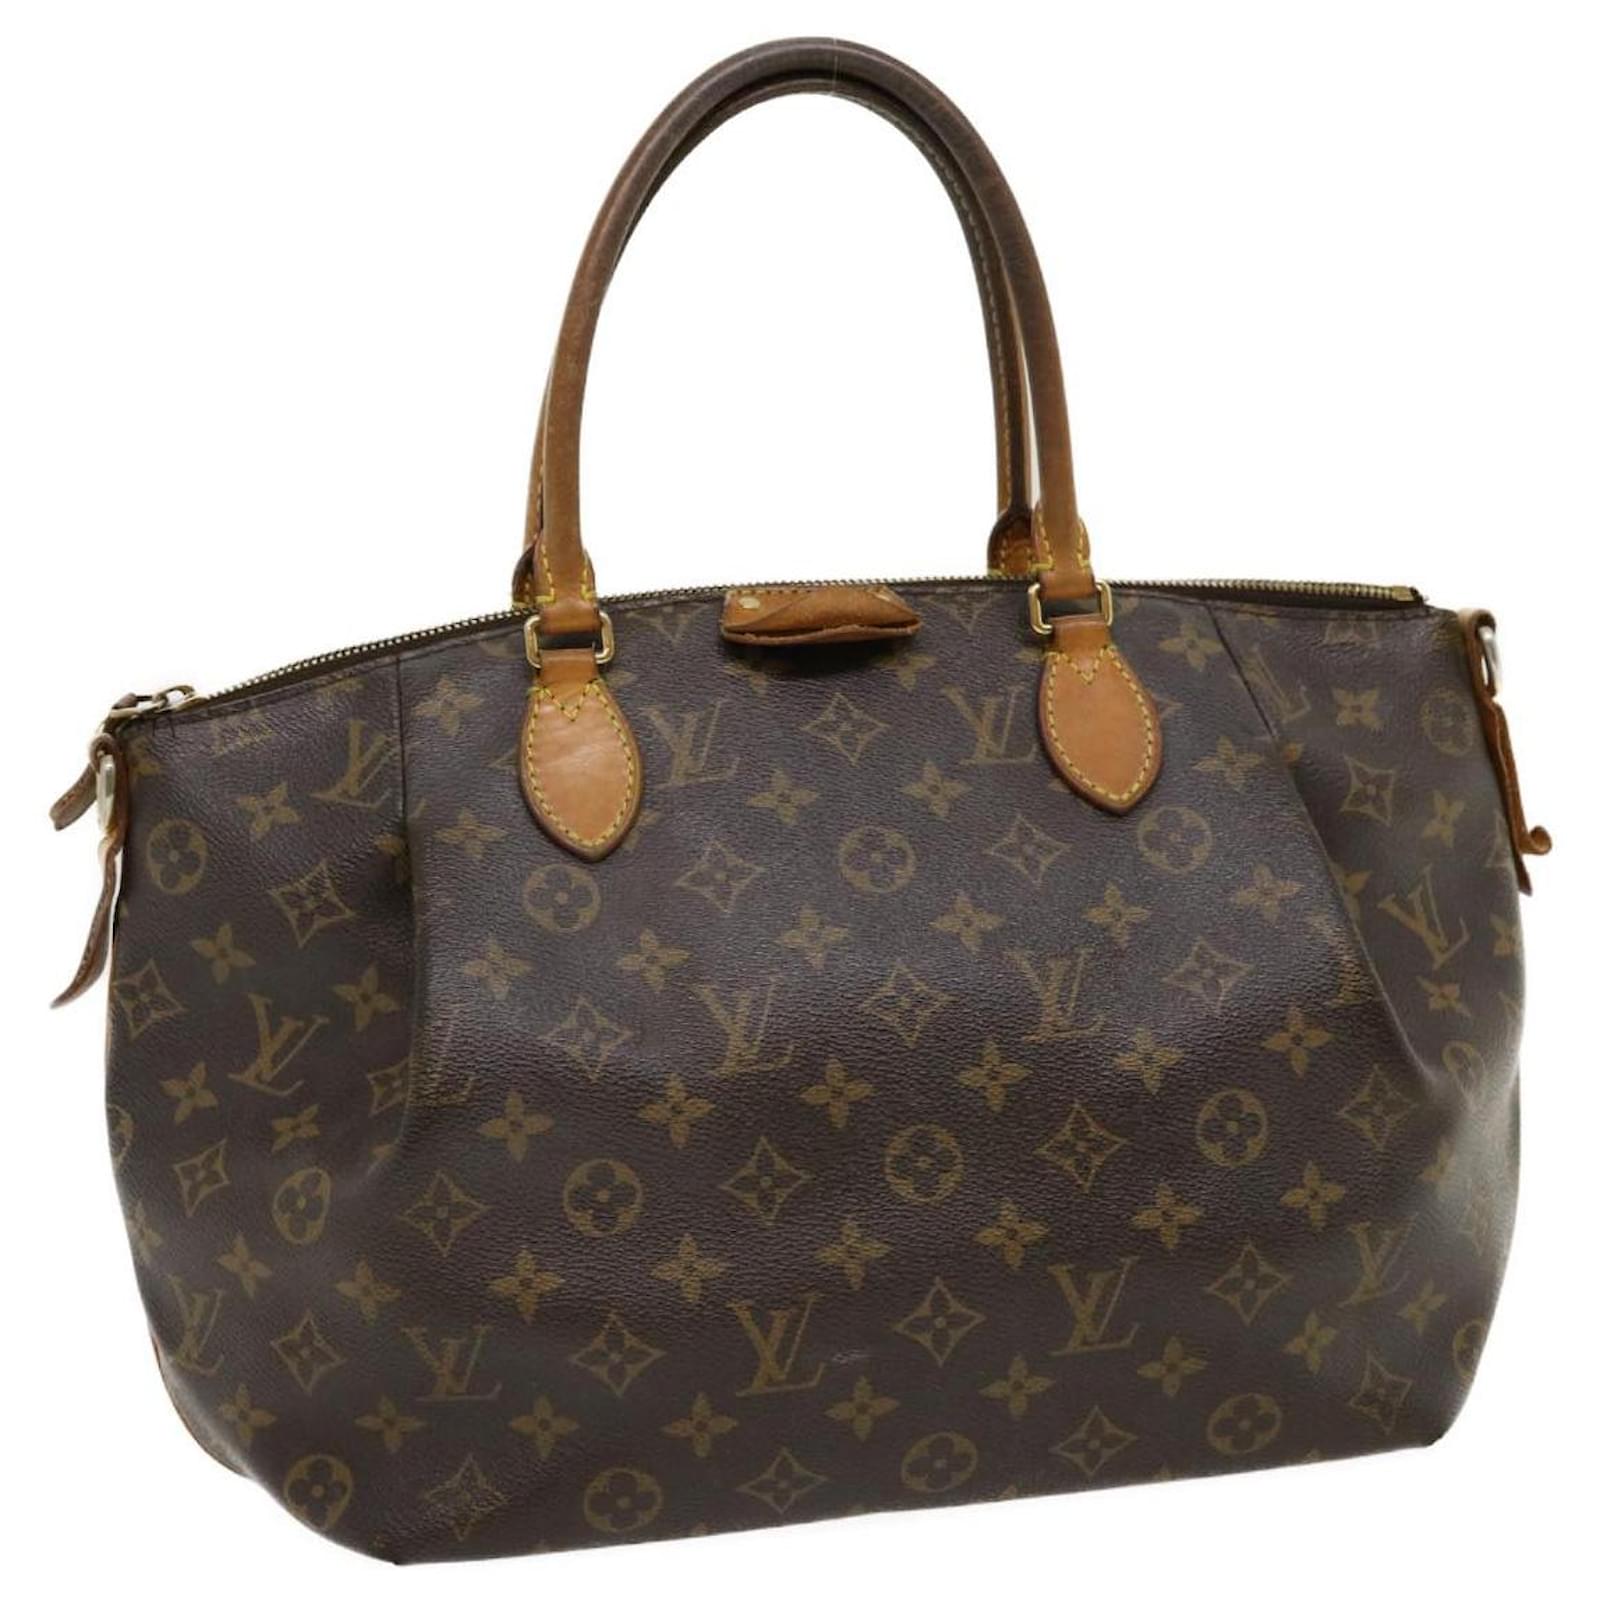 Louis Vuitton Turenne Pm and me in LV store  Cheap louis vuitton handbags, Louis  vuitton handbags, Louis vuitton